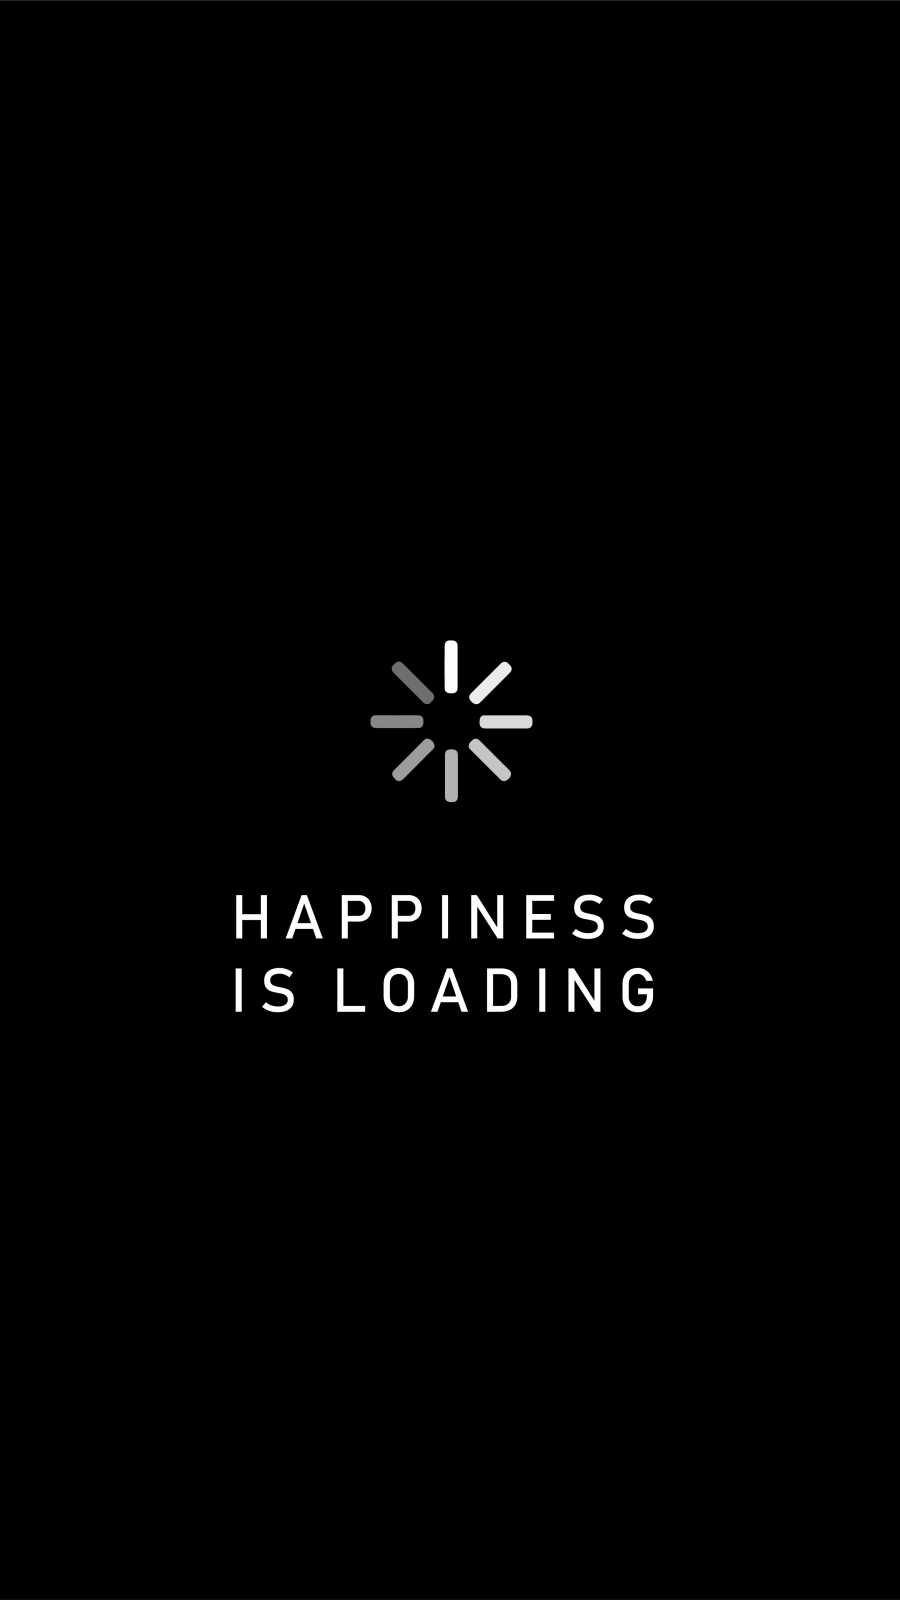 Happiness Is Loading - IPhone Wallpapers : iPhone Wallpapers